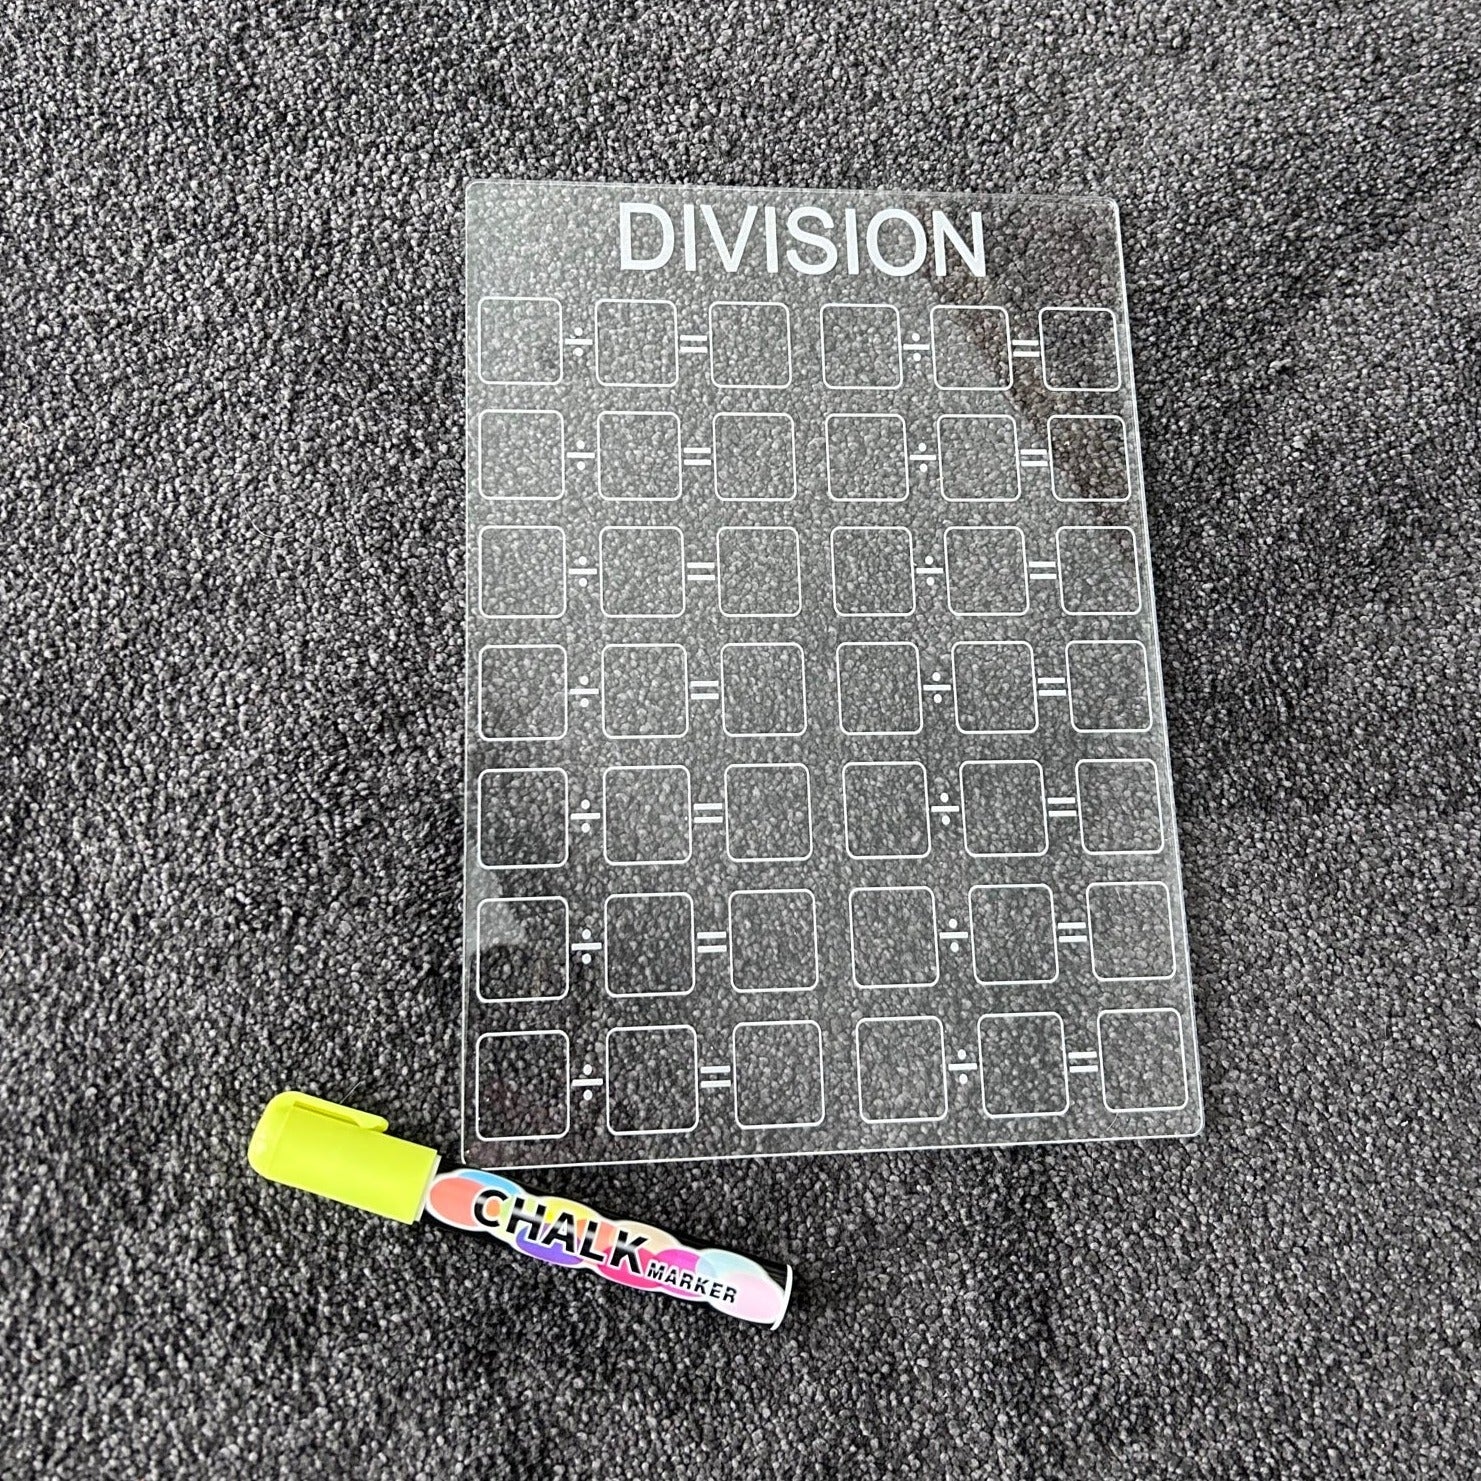 Division Maths Equation Board with Chalk Marker